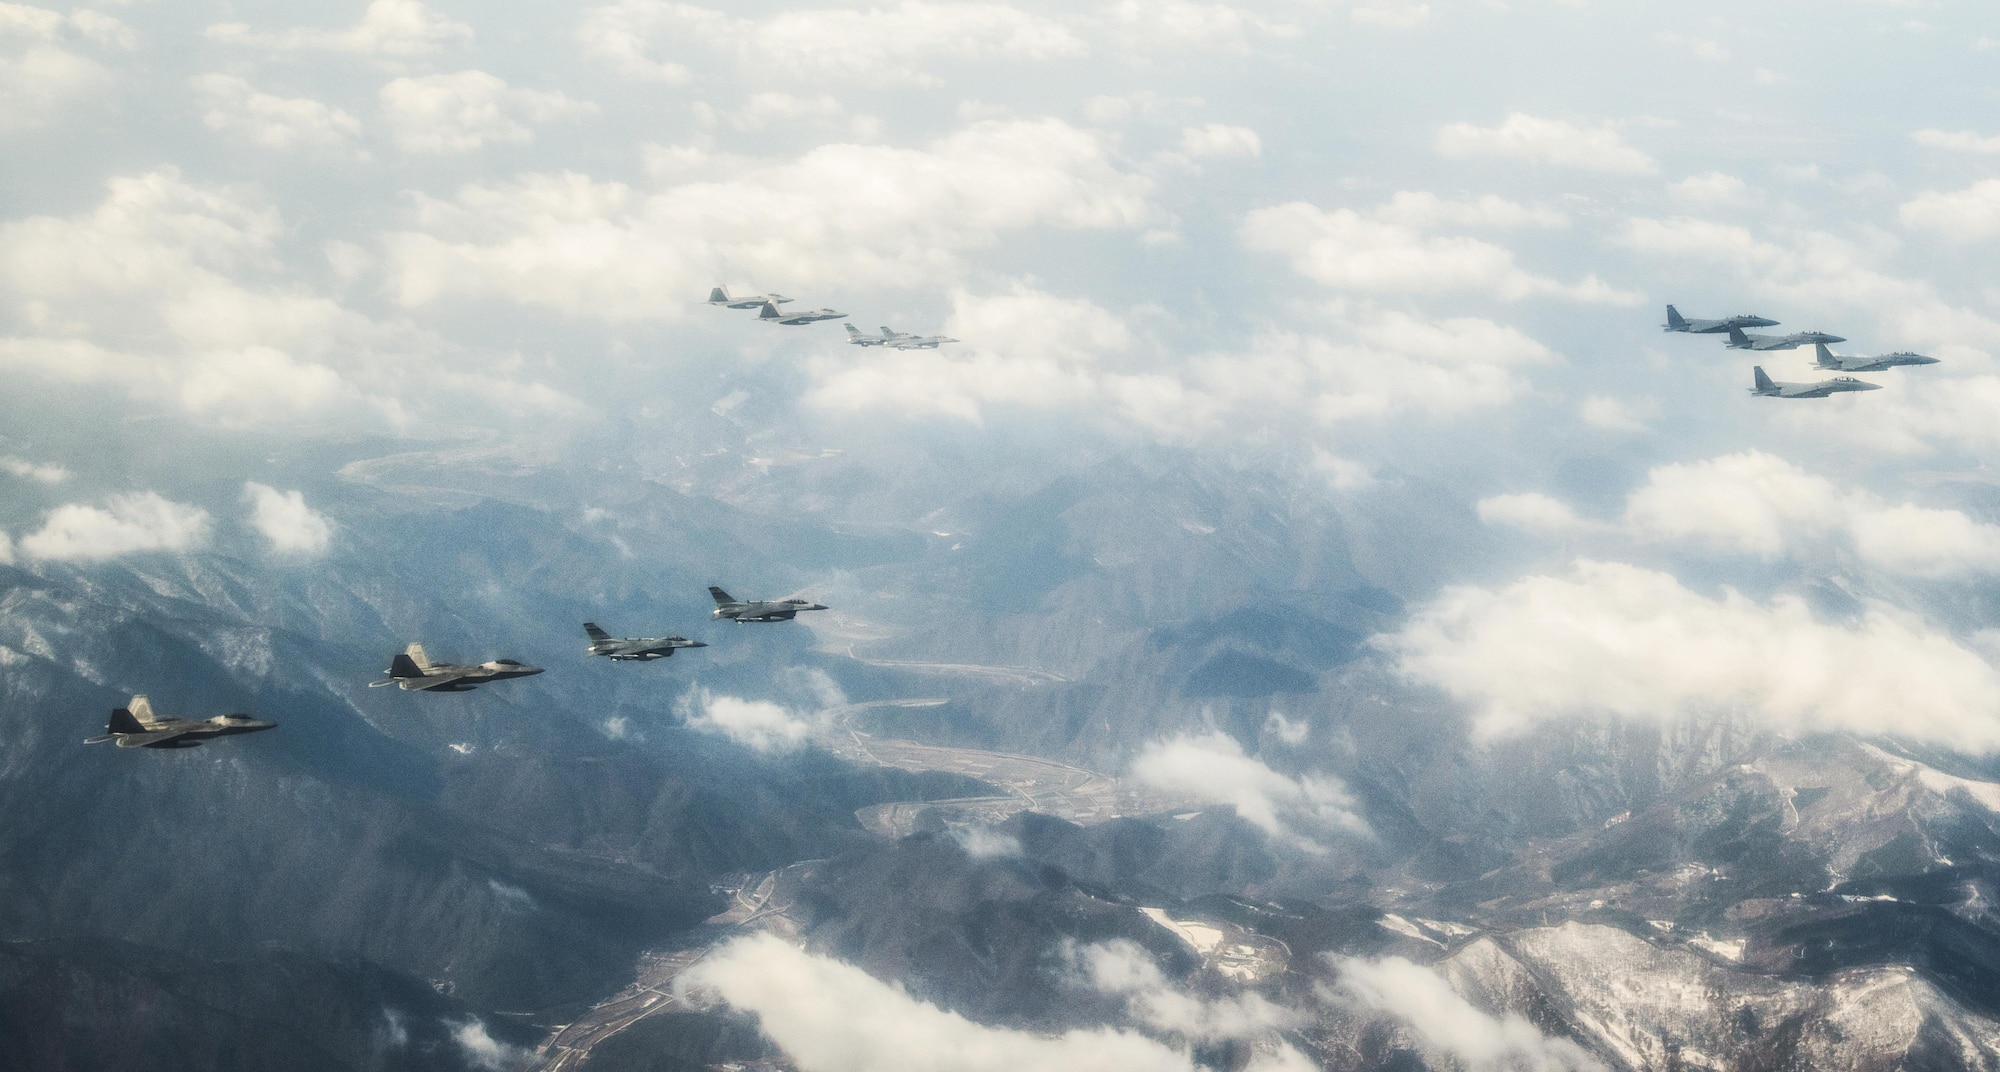 Four U.S. Air Force F-22 "Raptor" fighter aircraft from Kadena Air Base, Japan, fly over the skies of South Korea, in response to recent provocative action by North Korea Feb. 17, 2016. The Raptors were joined by four F-15 Slam Eagles and U.S. Air Force F-16 Fighting Falcons. The F-22 is designed to project air dominance rapidly and at great distances and currently cannot be matched by any known or projected fighter aircraft.  (U.S. Air Force photo by Airman 1st Class Dillian Bamman/Released)